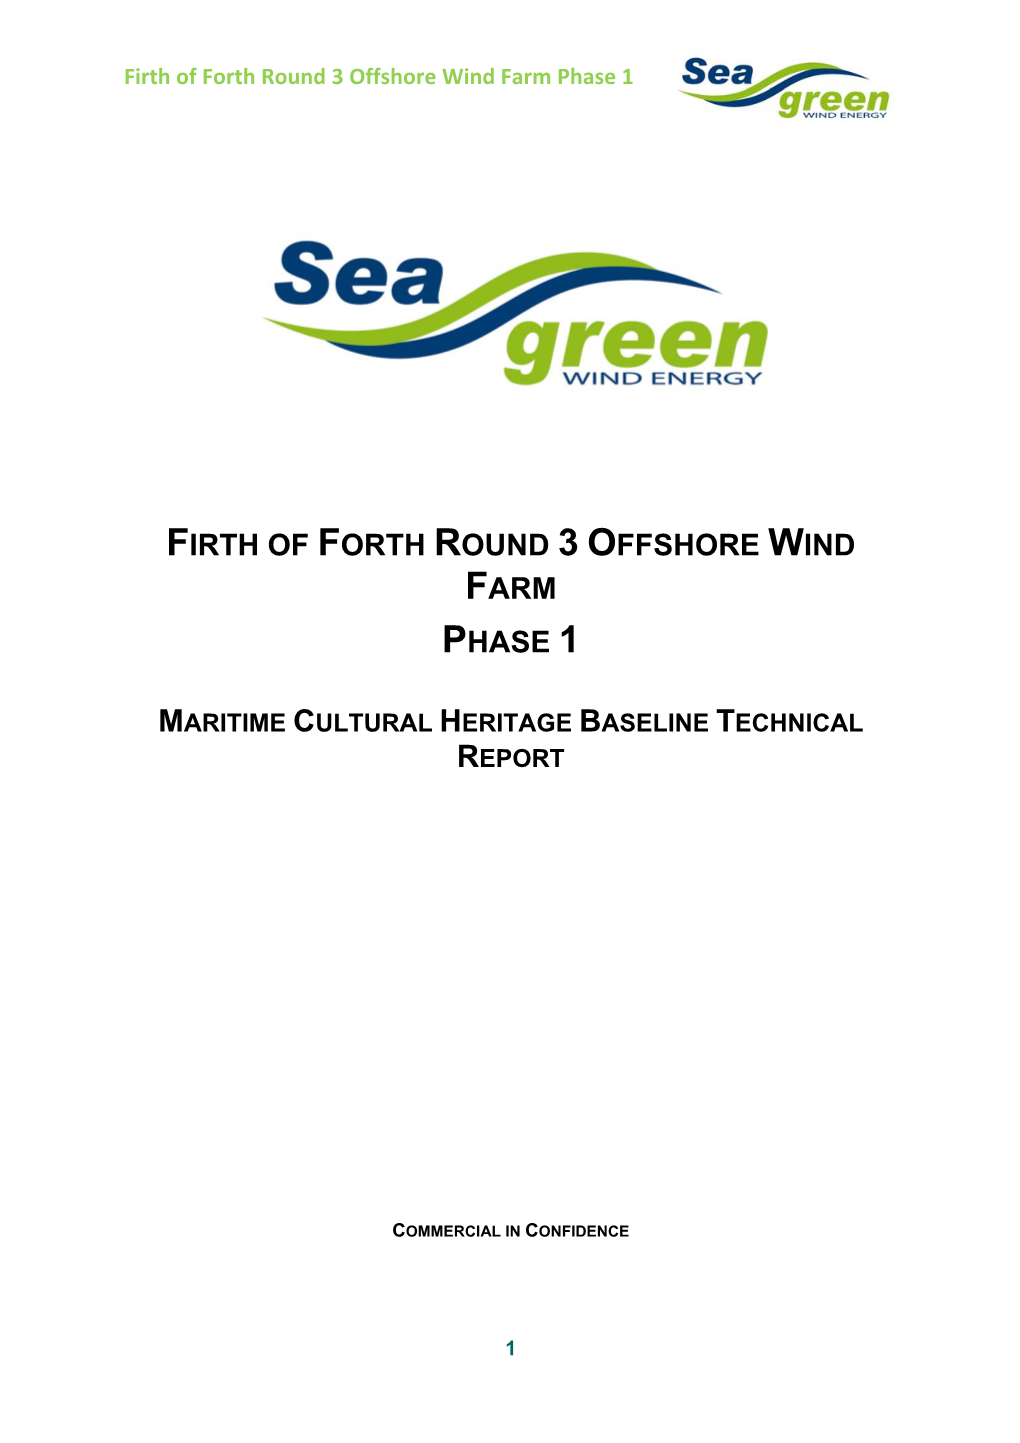 Firth of Forth Round 3 Offshore Wind Farm Phase 1